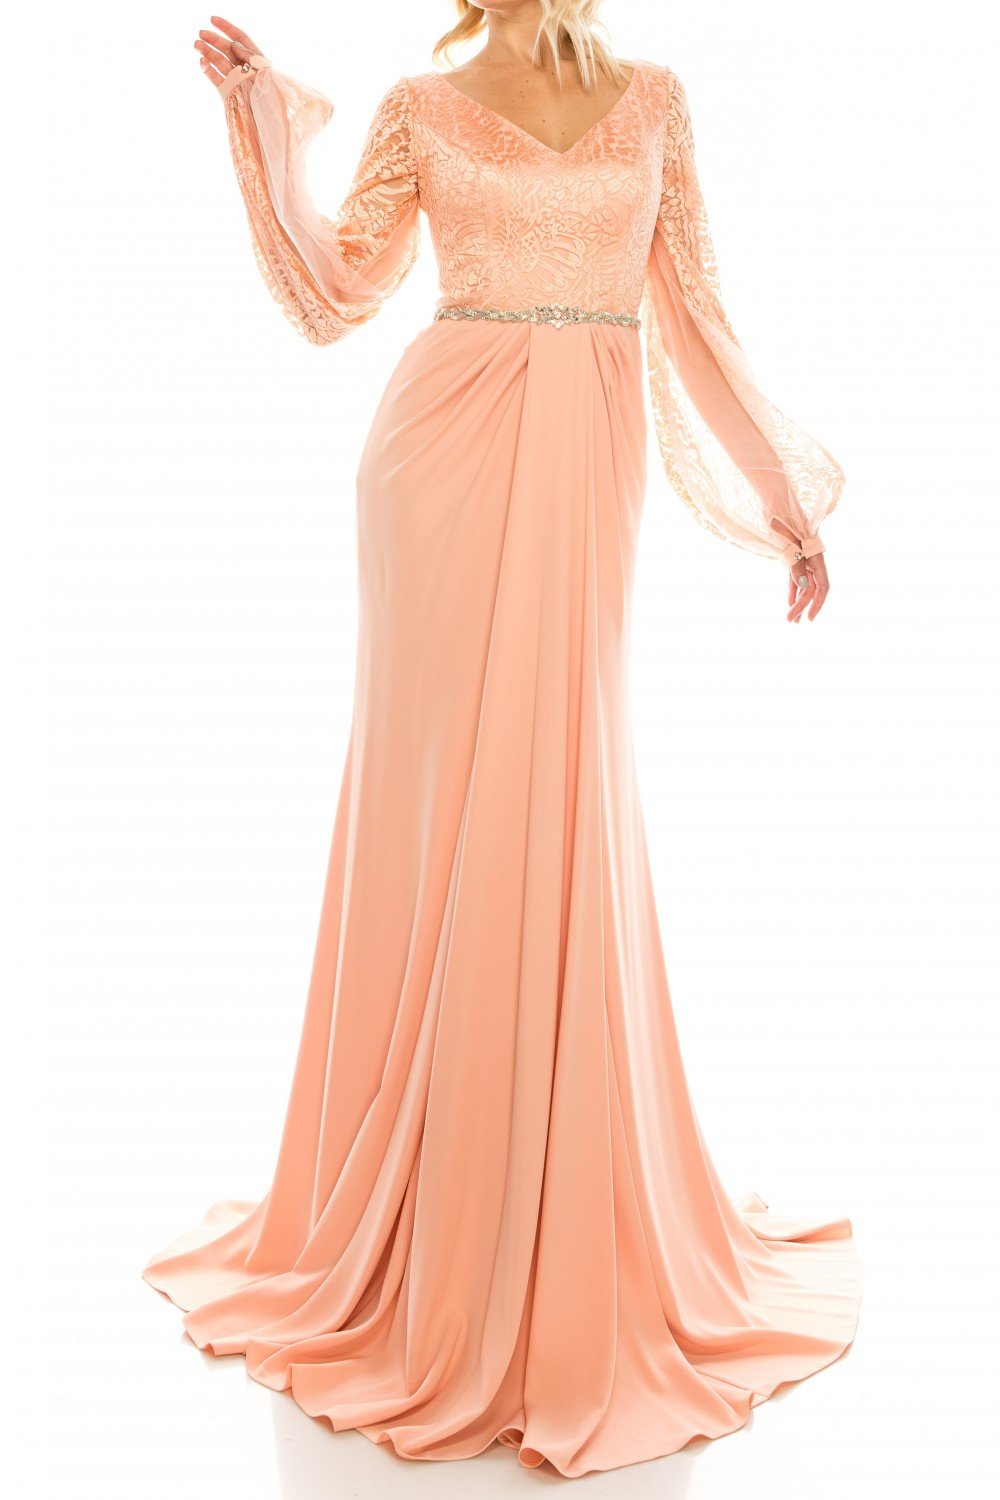 Odrella - 7Y1090 Bishop Sleeve Embroidered Mesh Jacquard Gown In Orange and Pink